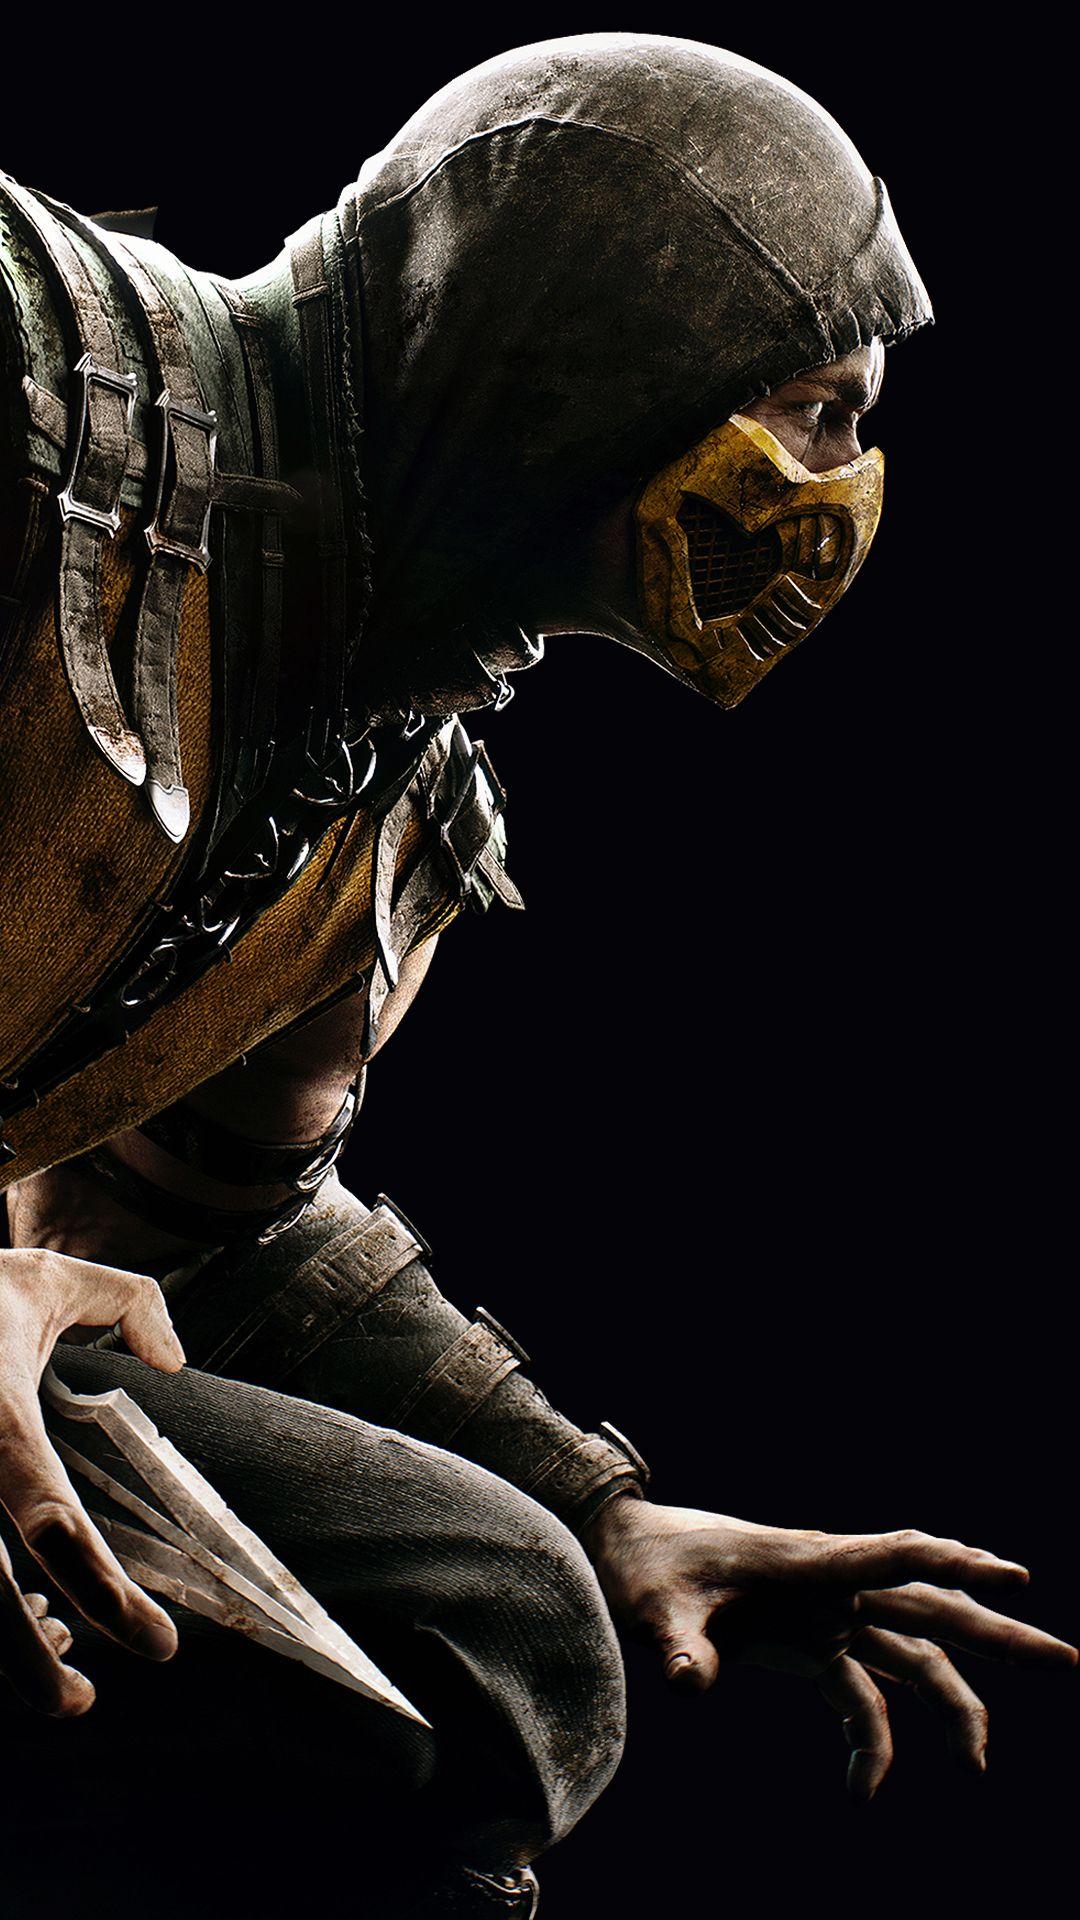 Scorpion HD Wallpaper For Your Mobile